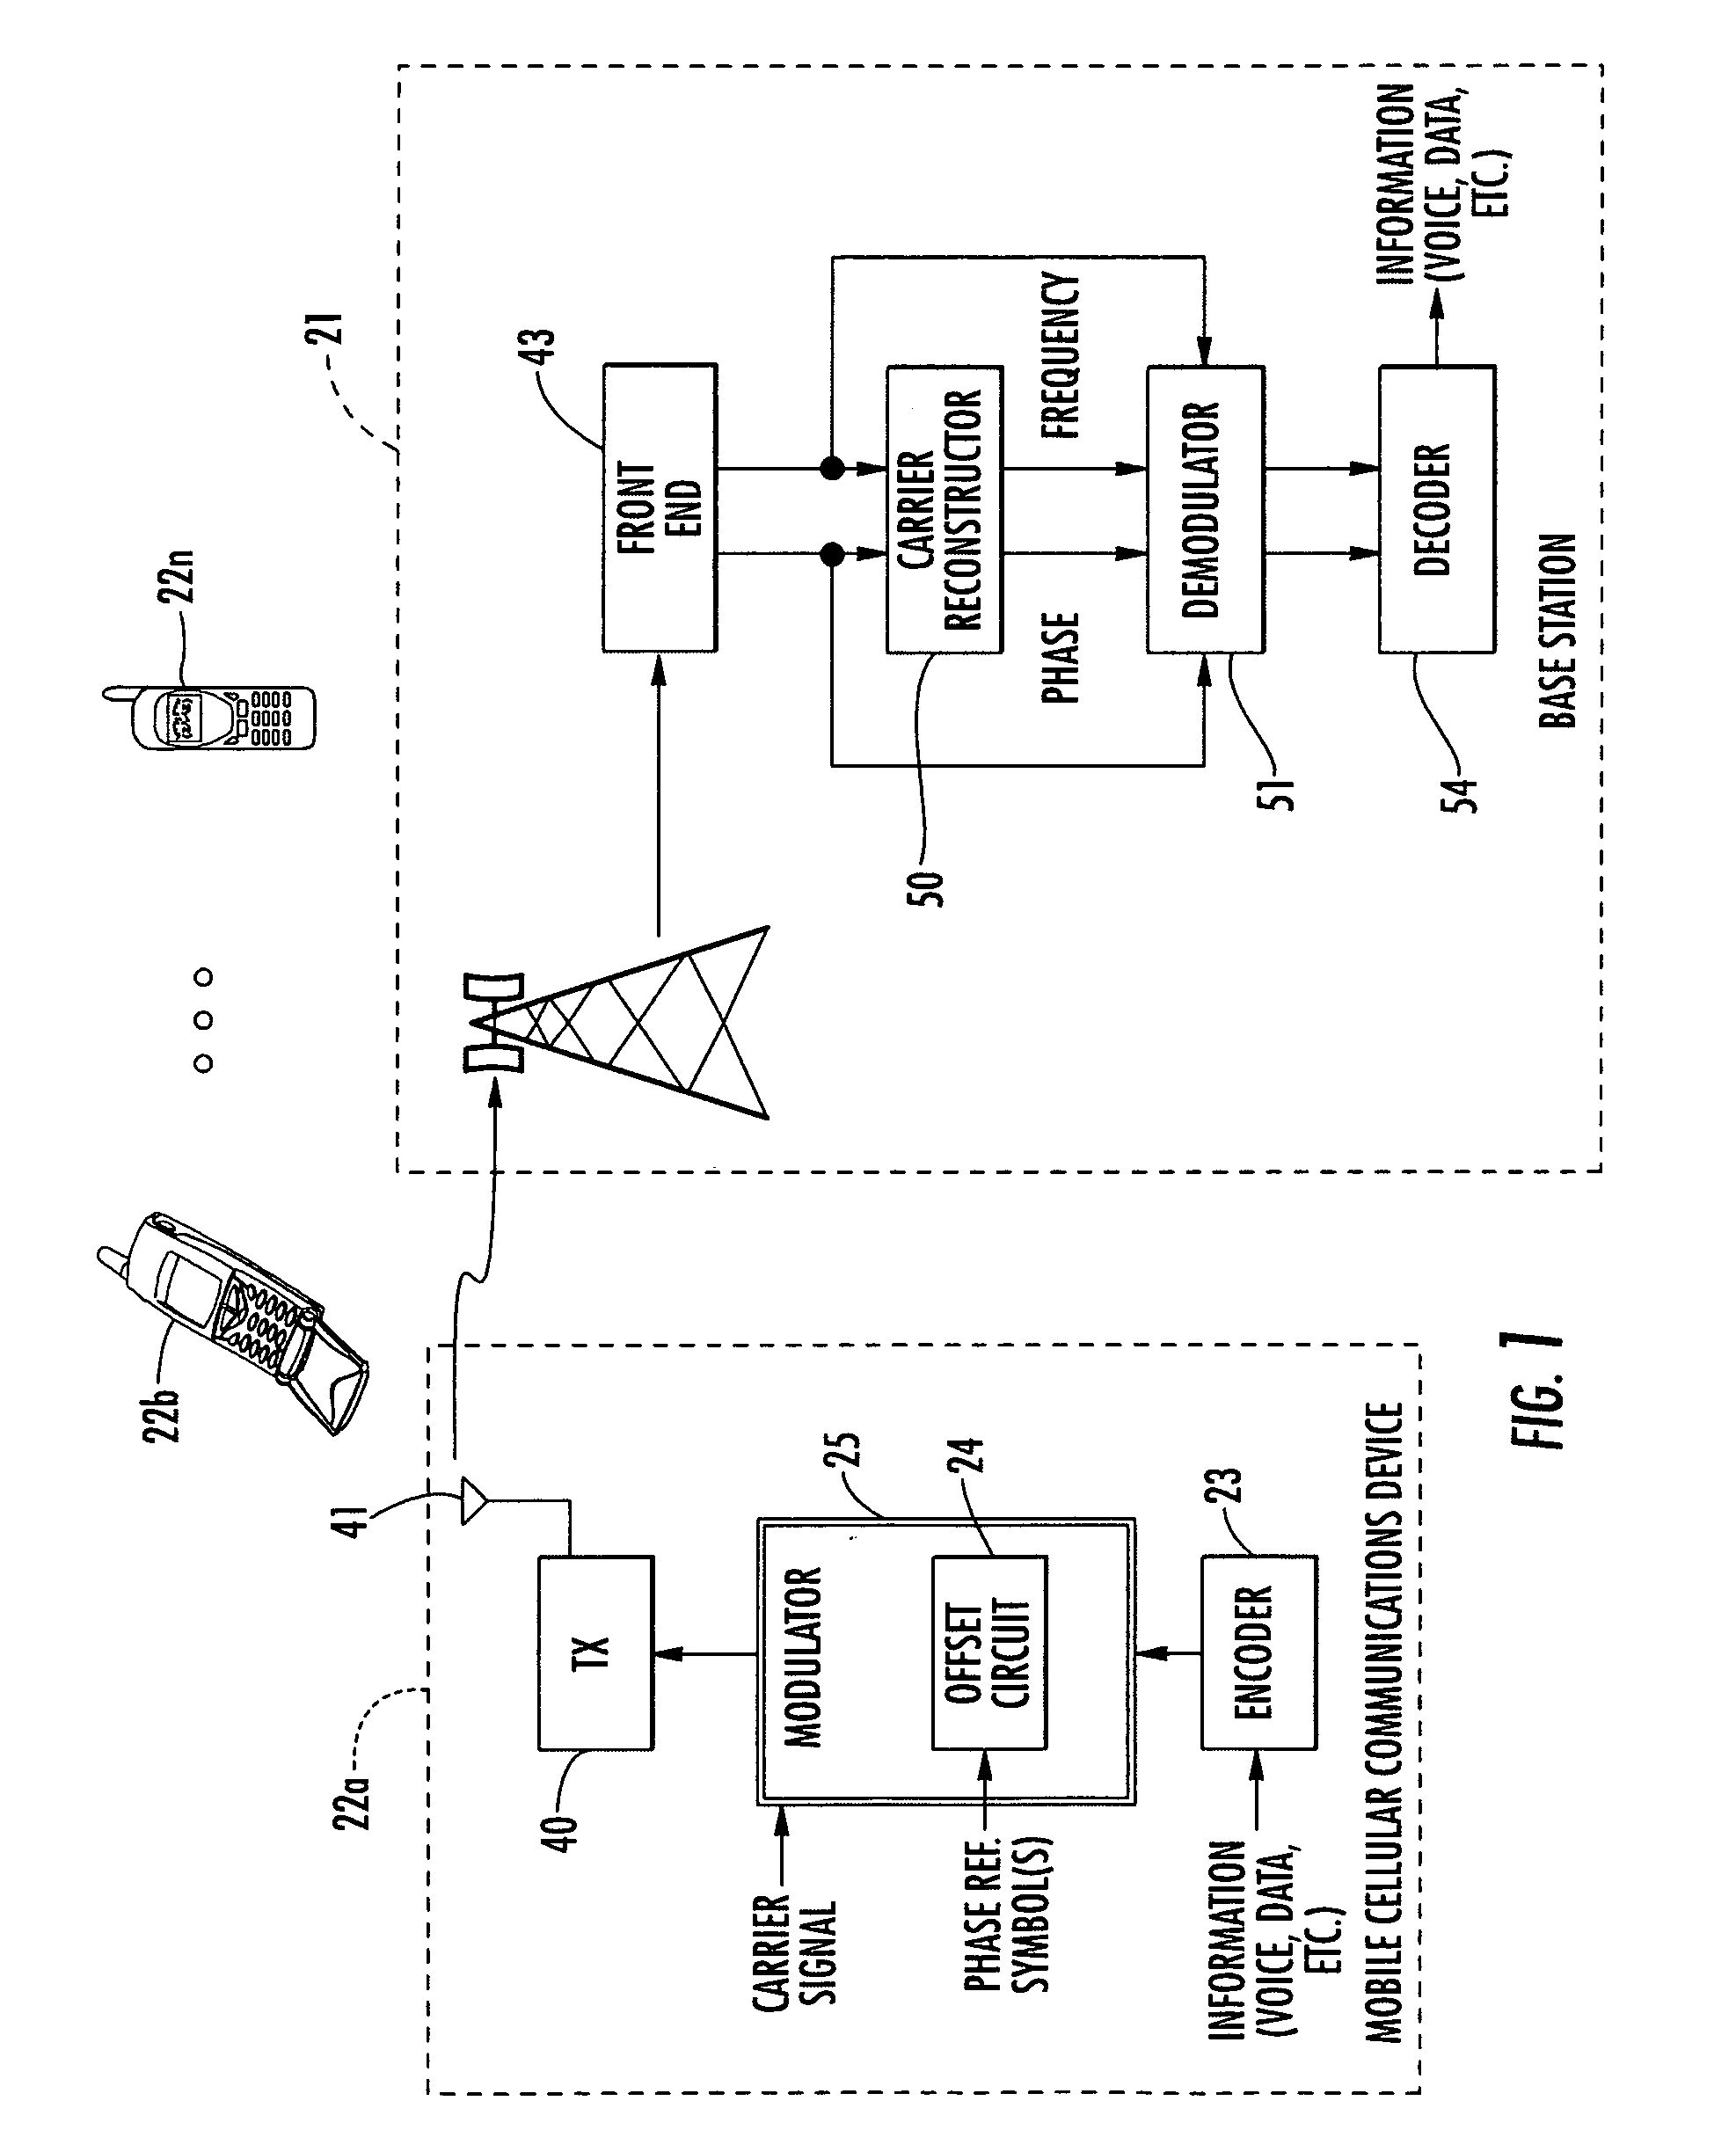 Cellular communications system using baseband carrier injection and related methods